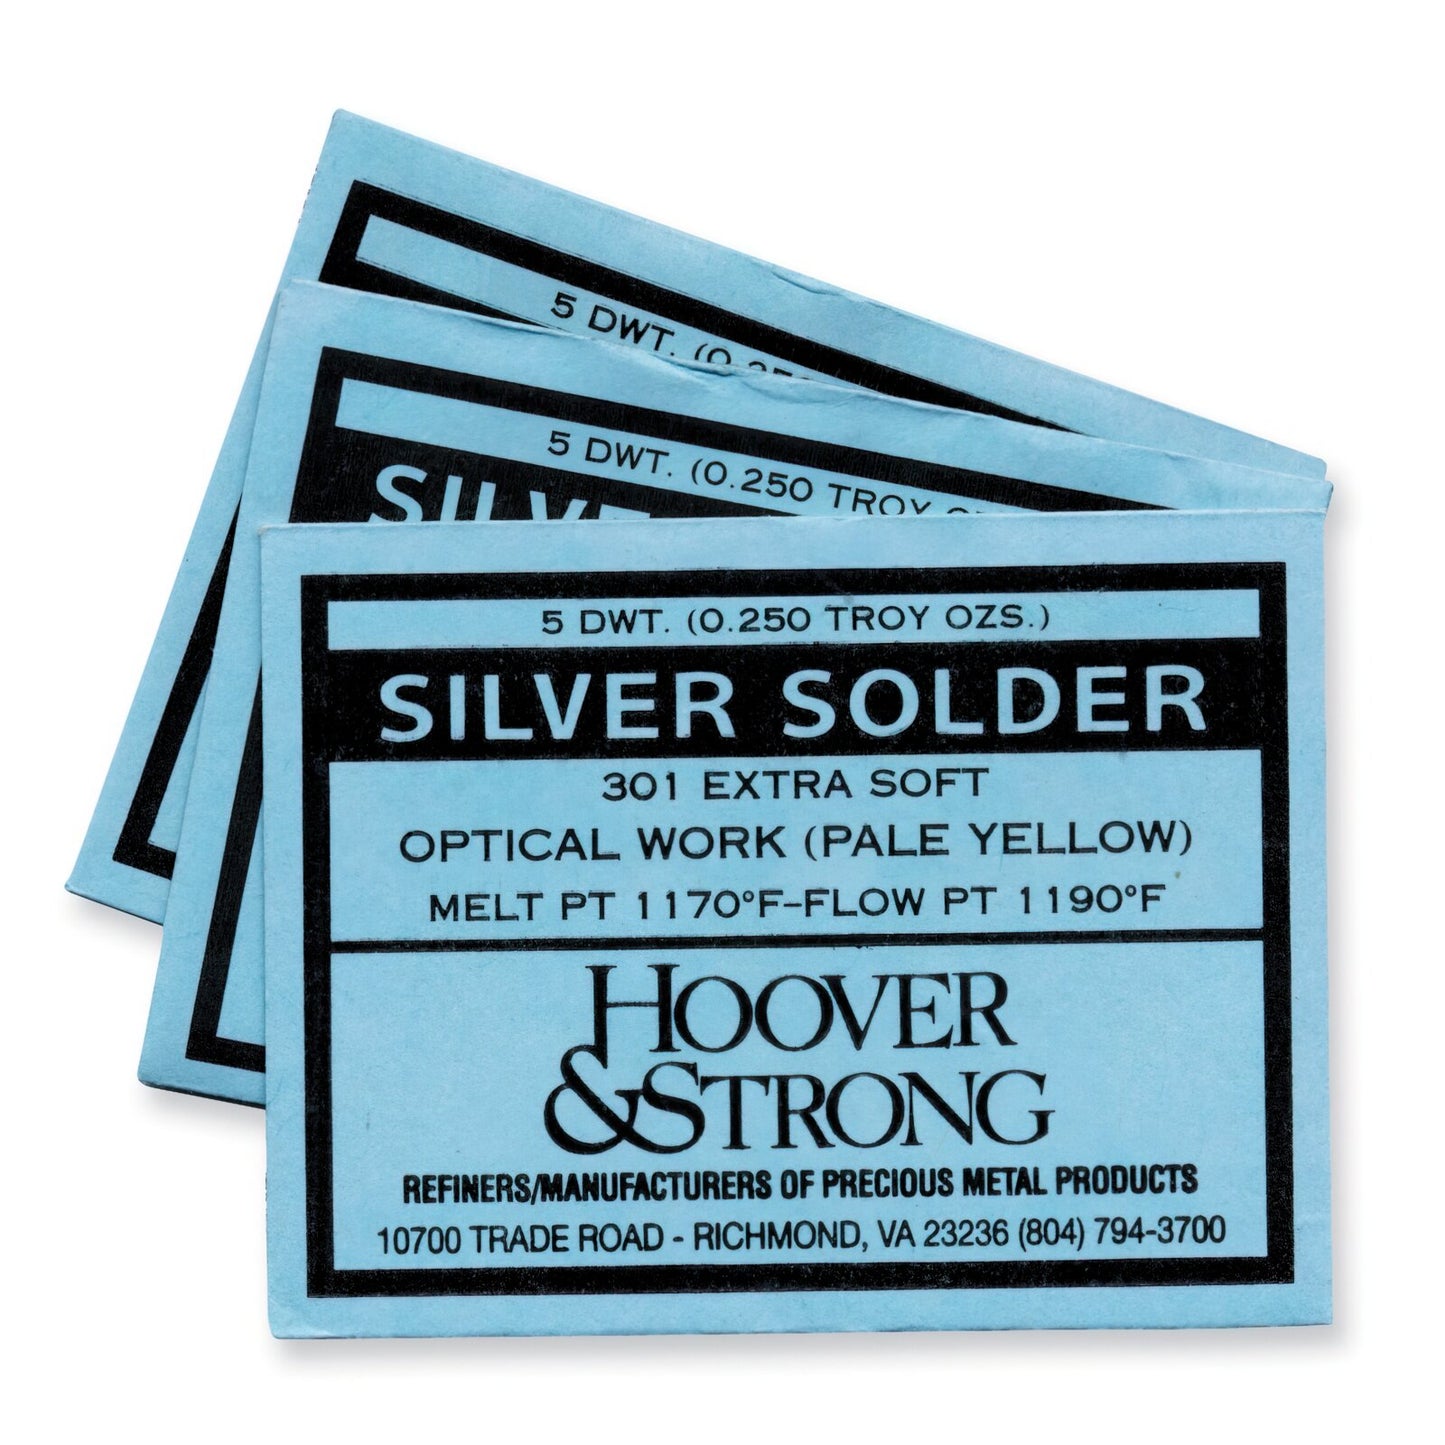 Hoover & Strong Sterling Silver Solder Medium & Soft Jewelry Repair Kit 2Pcs